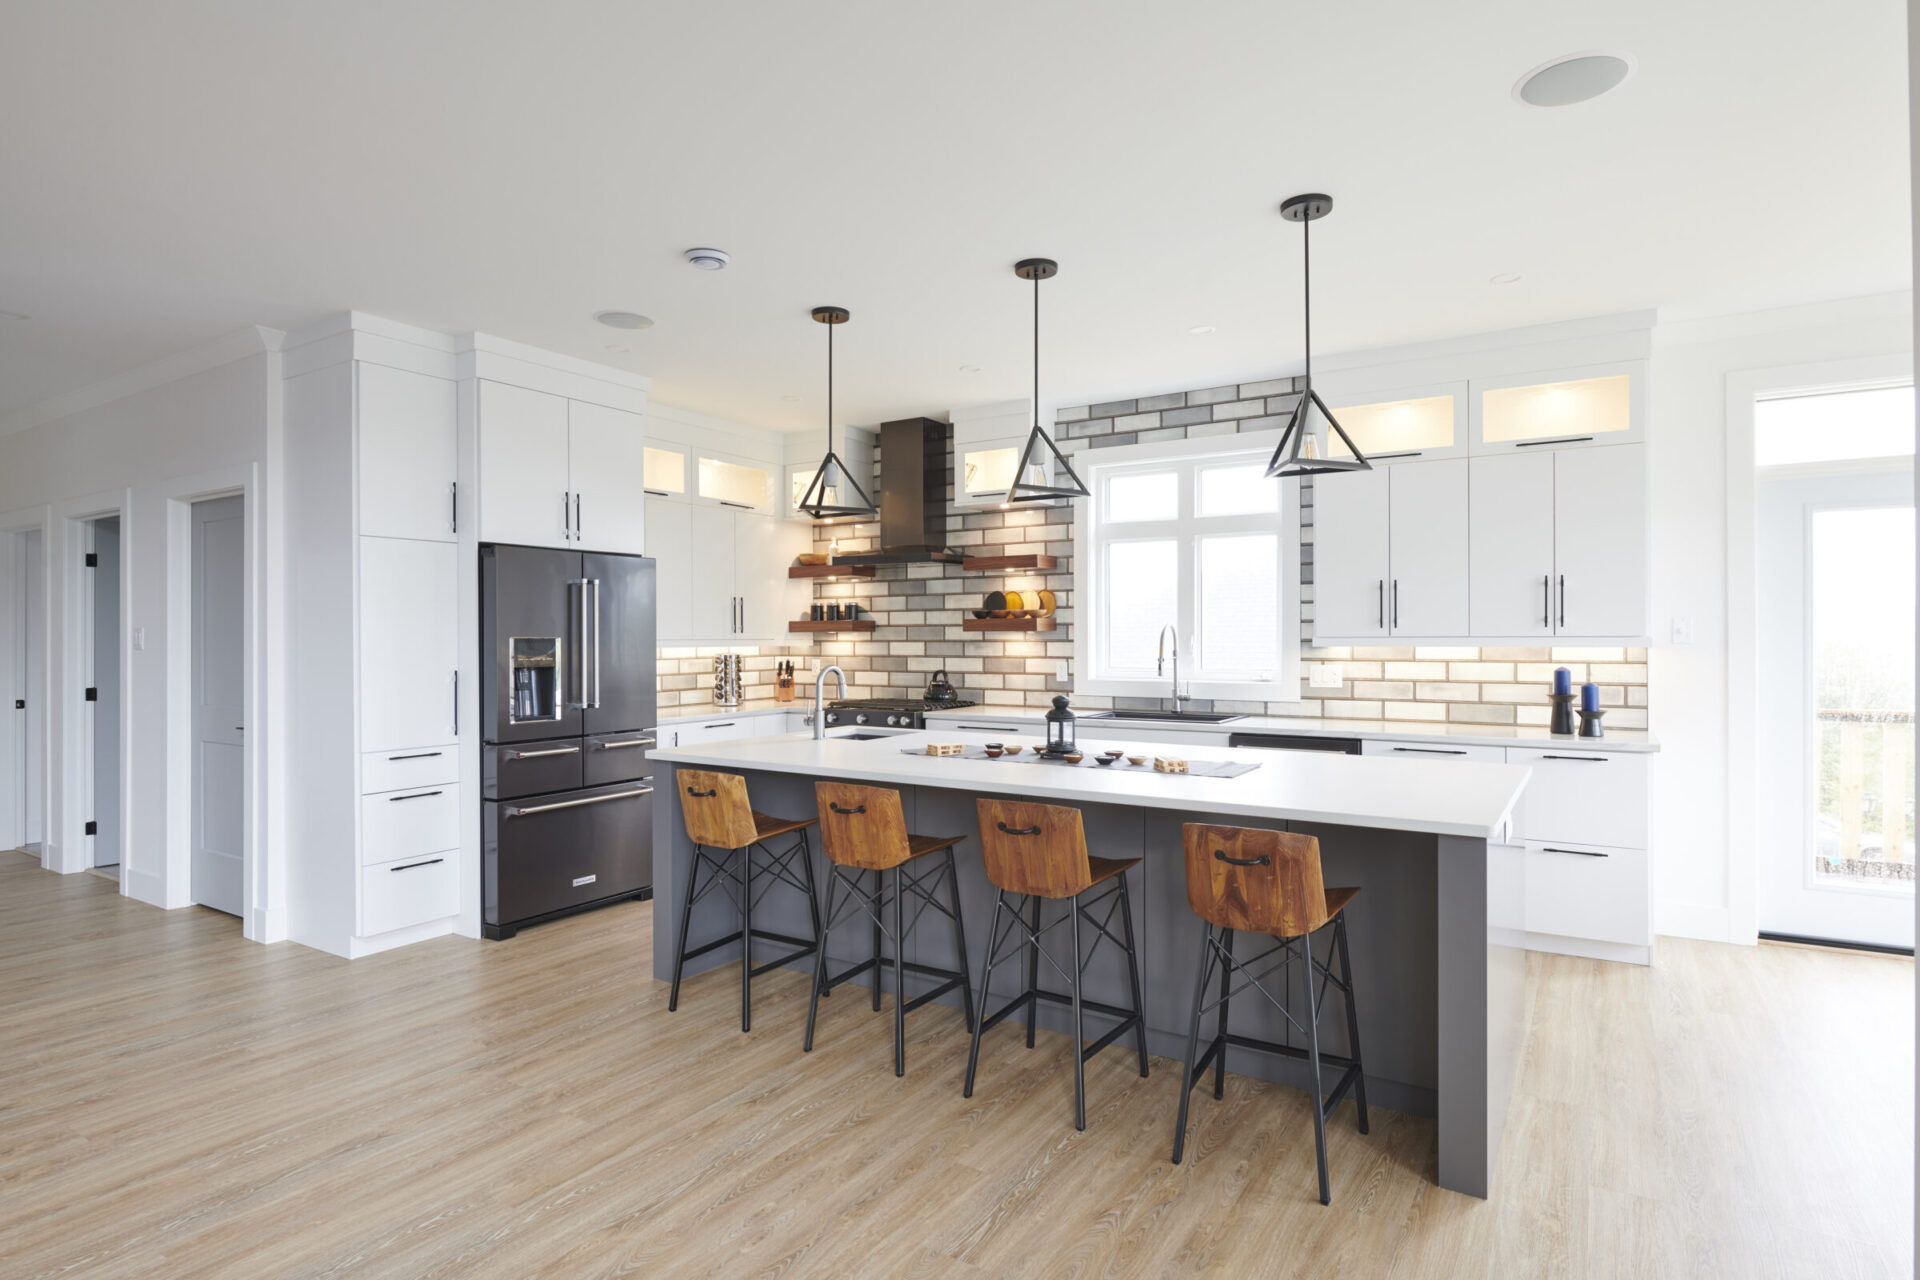 Modern kitchen interior with a center island, pendant lights, wooden stools, stainless steel appliances, white cabinets, and a light hardwood floor.